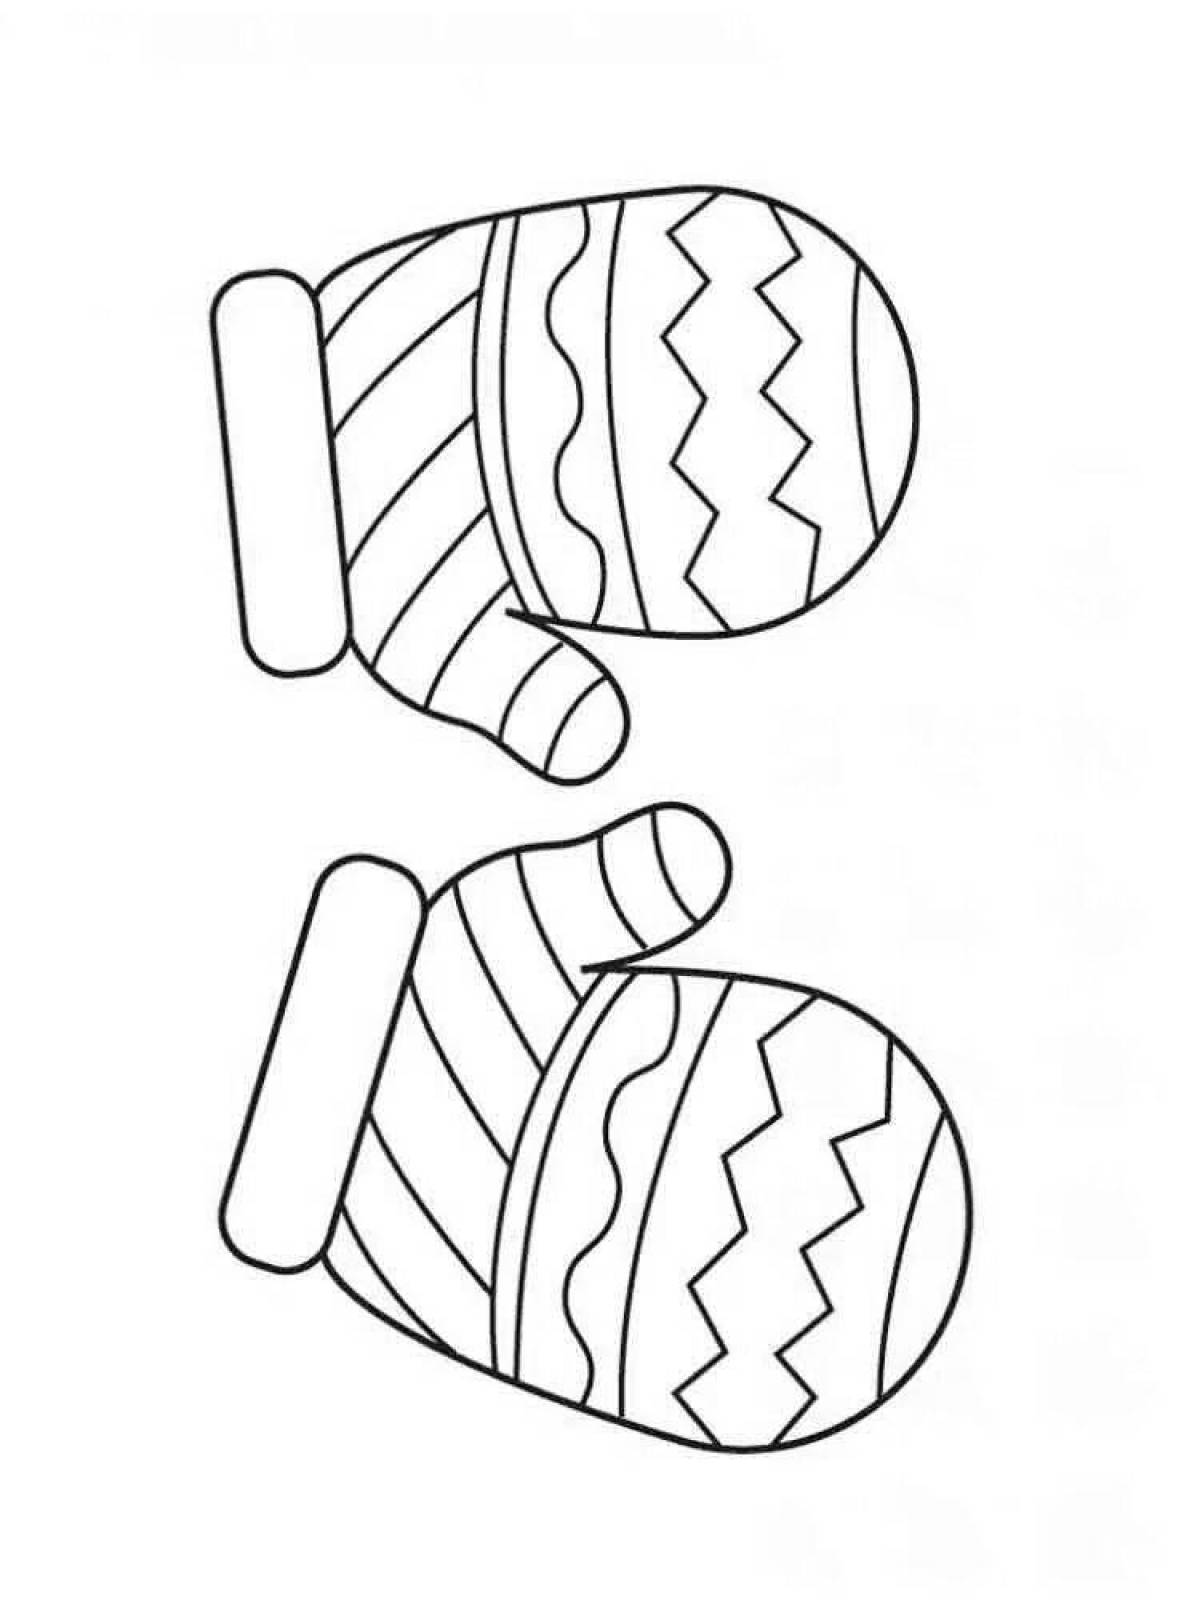 Coloring page attractive pattern of mittens